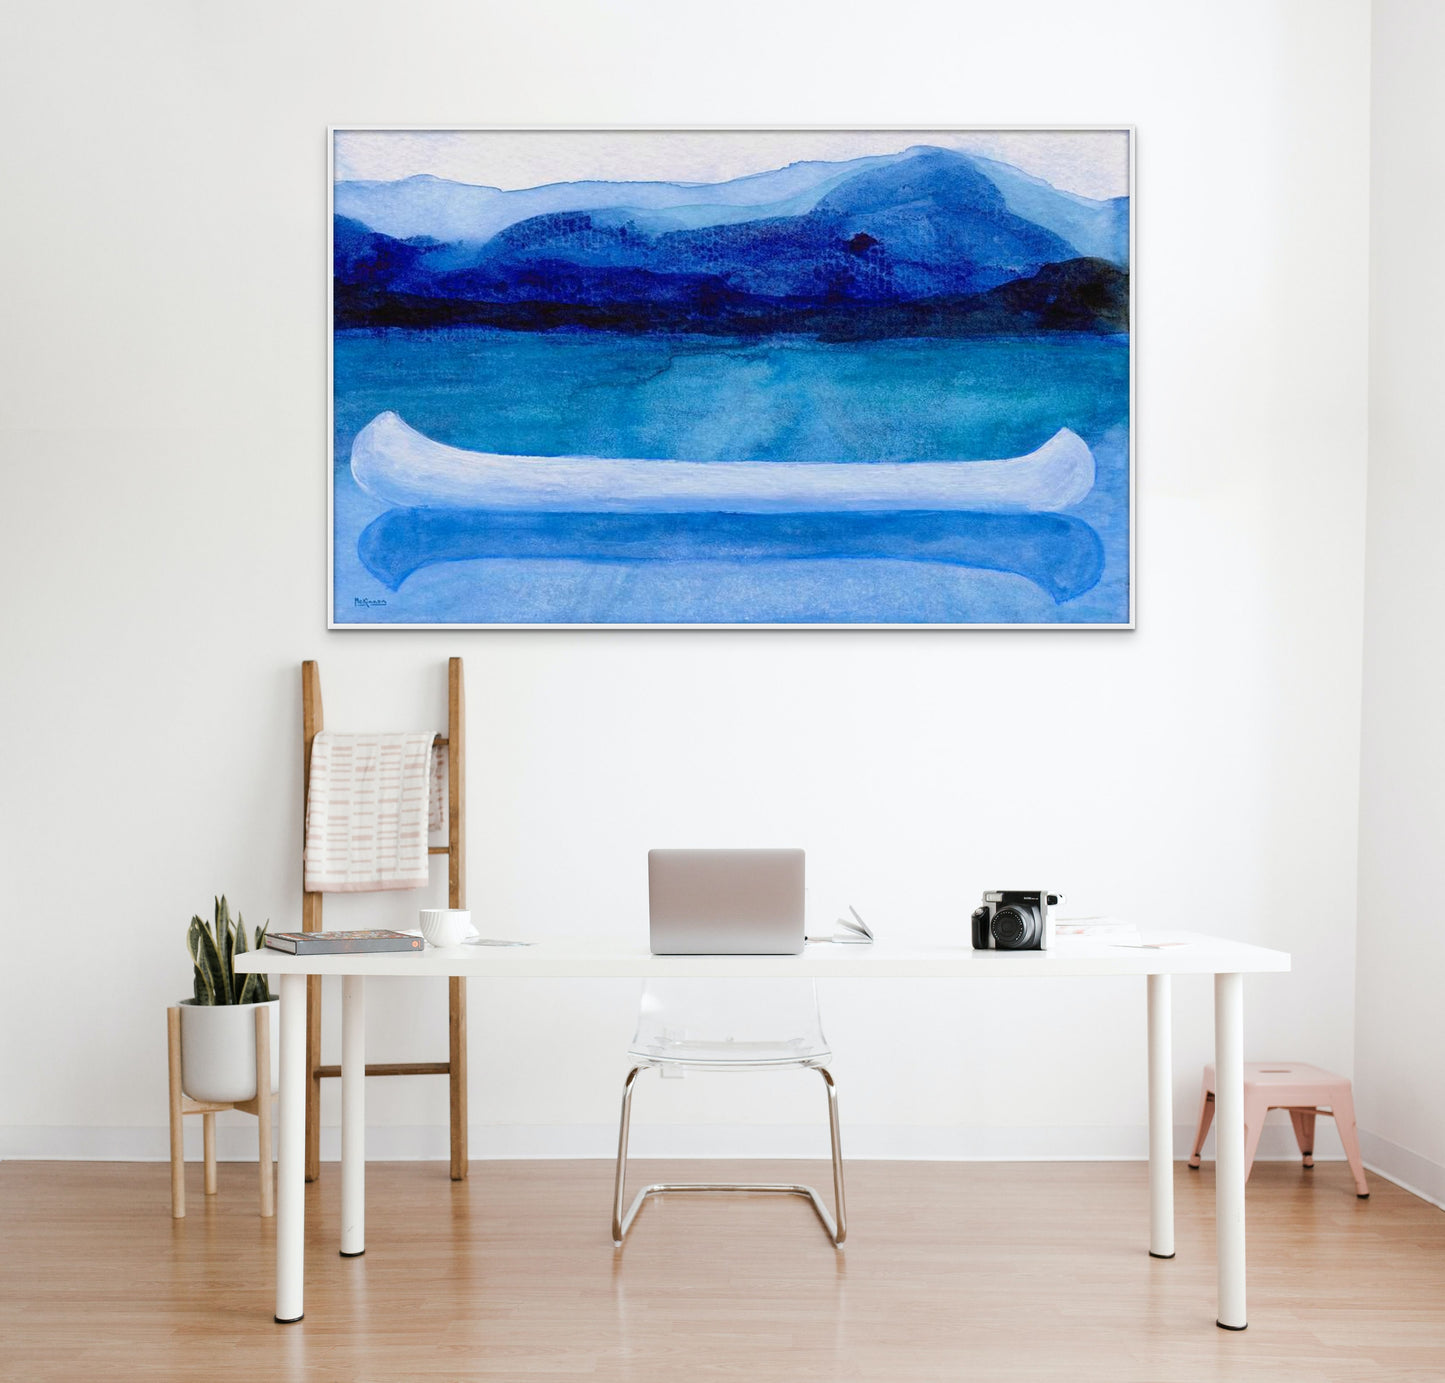 A work of canoeing art by Canadian artist Catherine McKinnon. The watercolor depicts a small white boat, a "canoe", on blue water with a dark blue distant shore and lighter blue distant moutains. The giclee print is framed in white and is mounted on a white wall above a white, stylish, contemporary desk and chair..